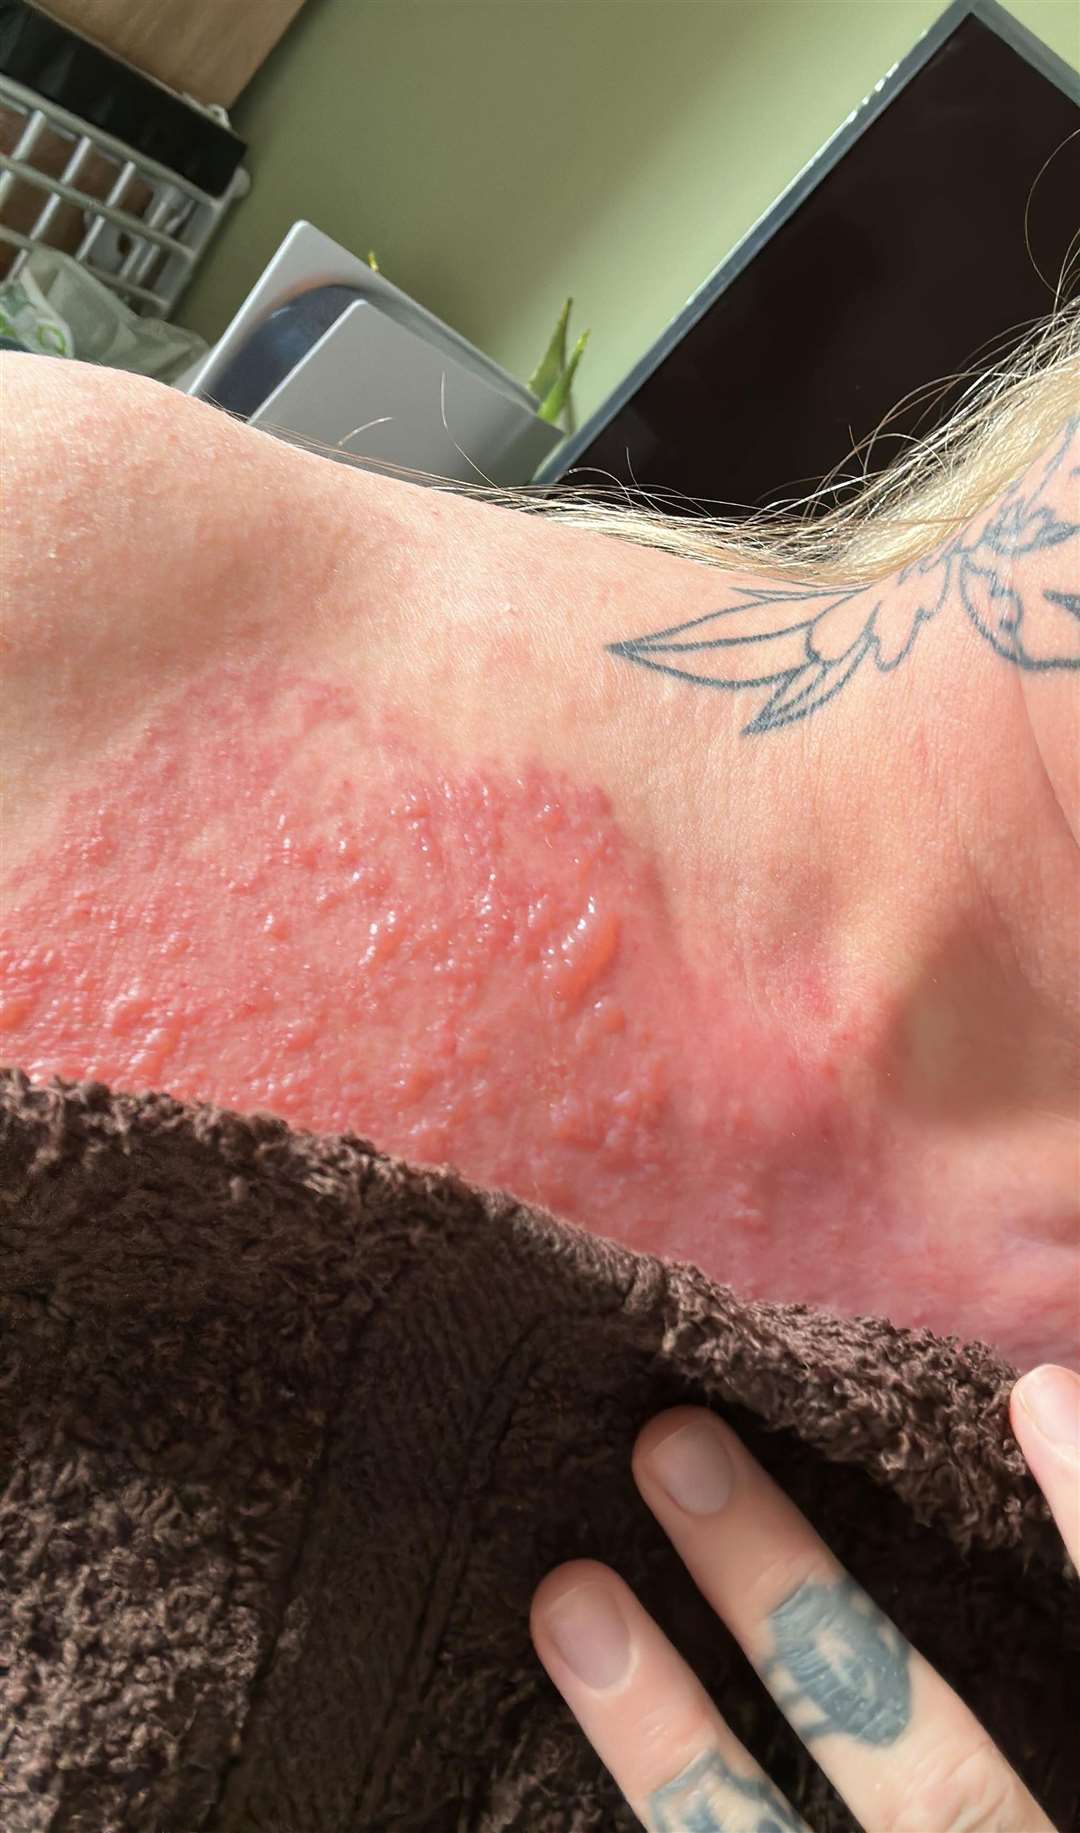 Abbie Smith's chest came out in blisters after using a fake numbing cream before a tattoo appointment. Picture SWNS